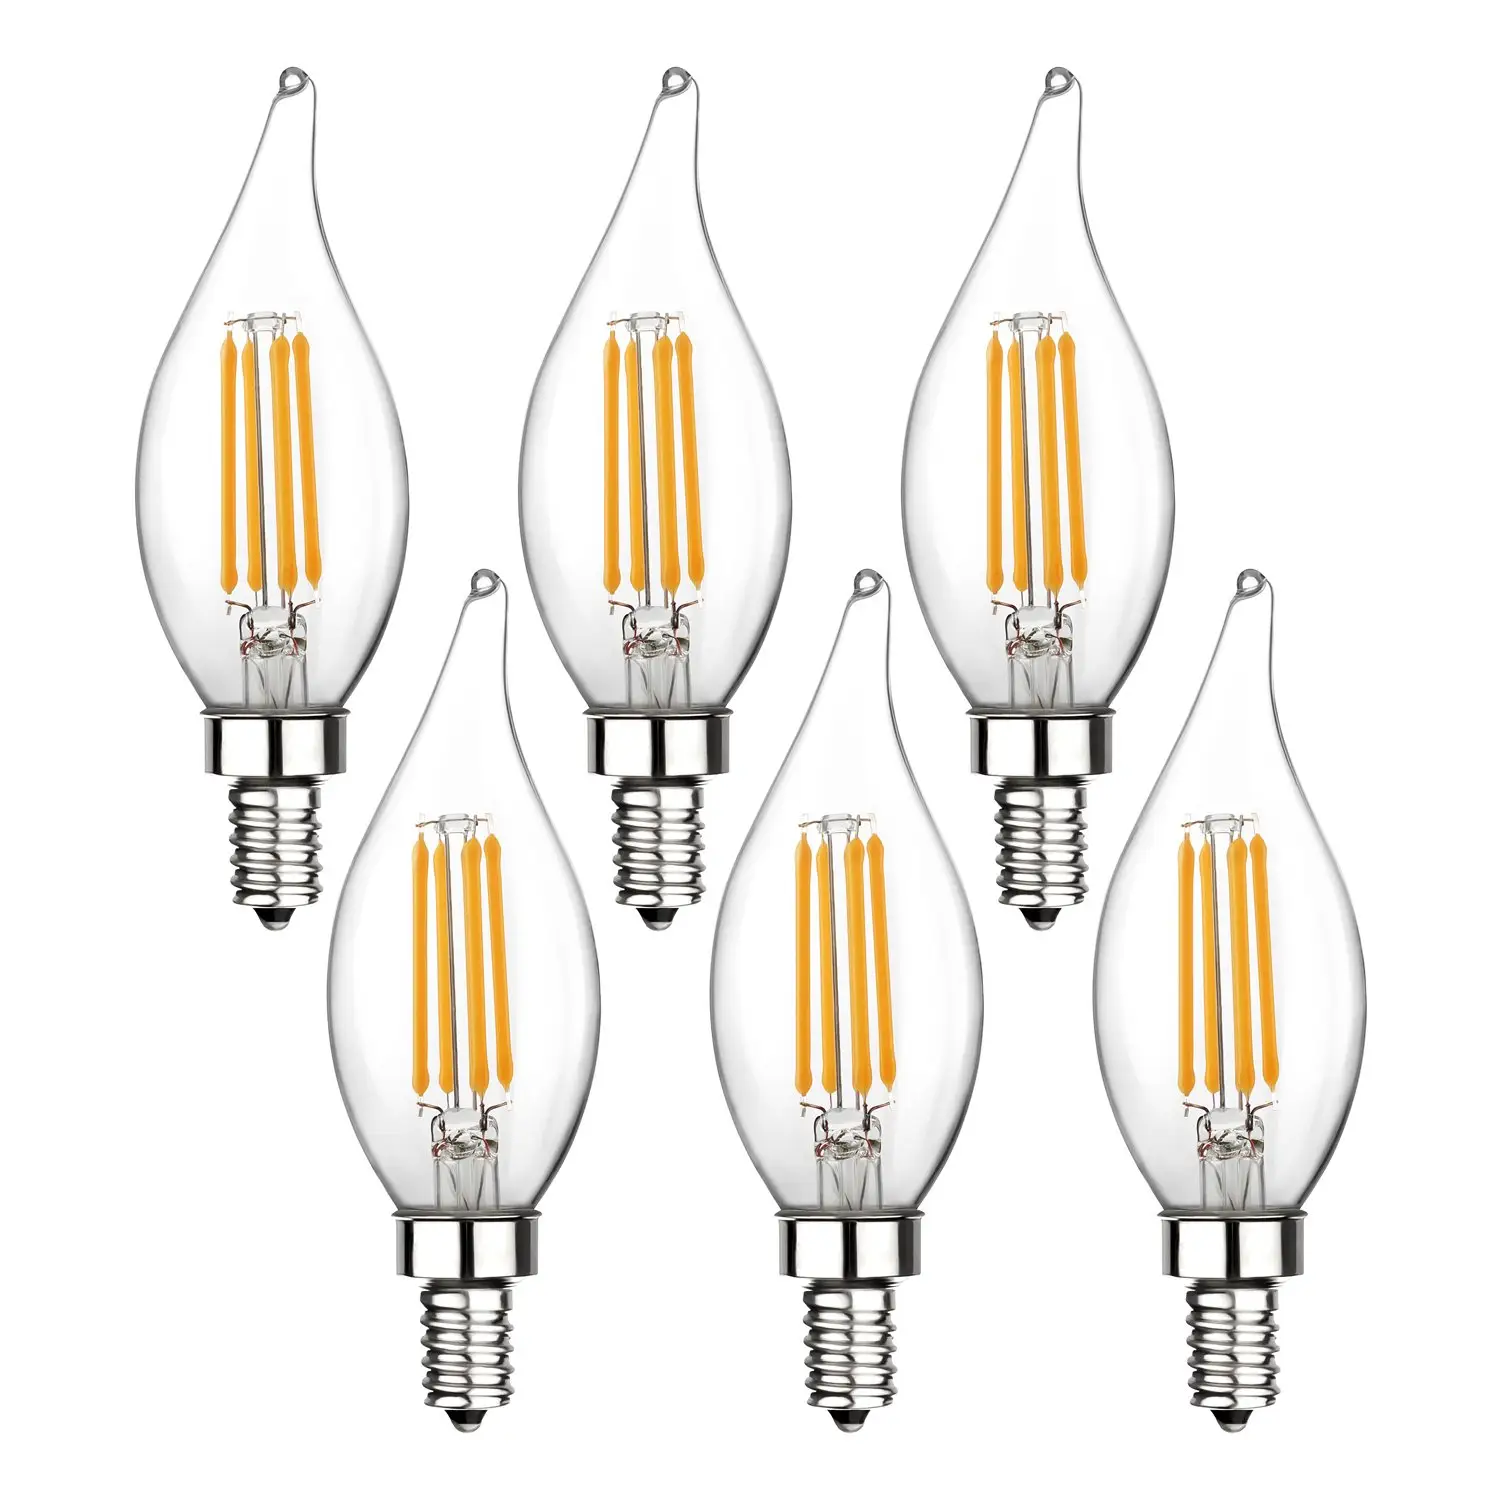 New products C35 Short tail Led Candle bulb C35L Led filament chandelier replacement Lamp